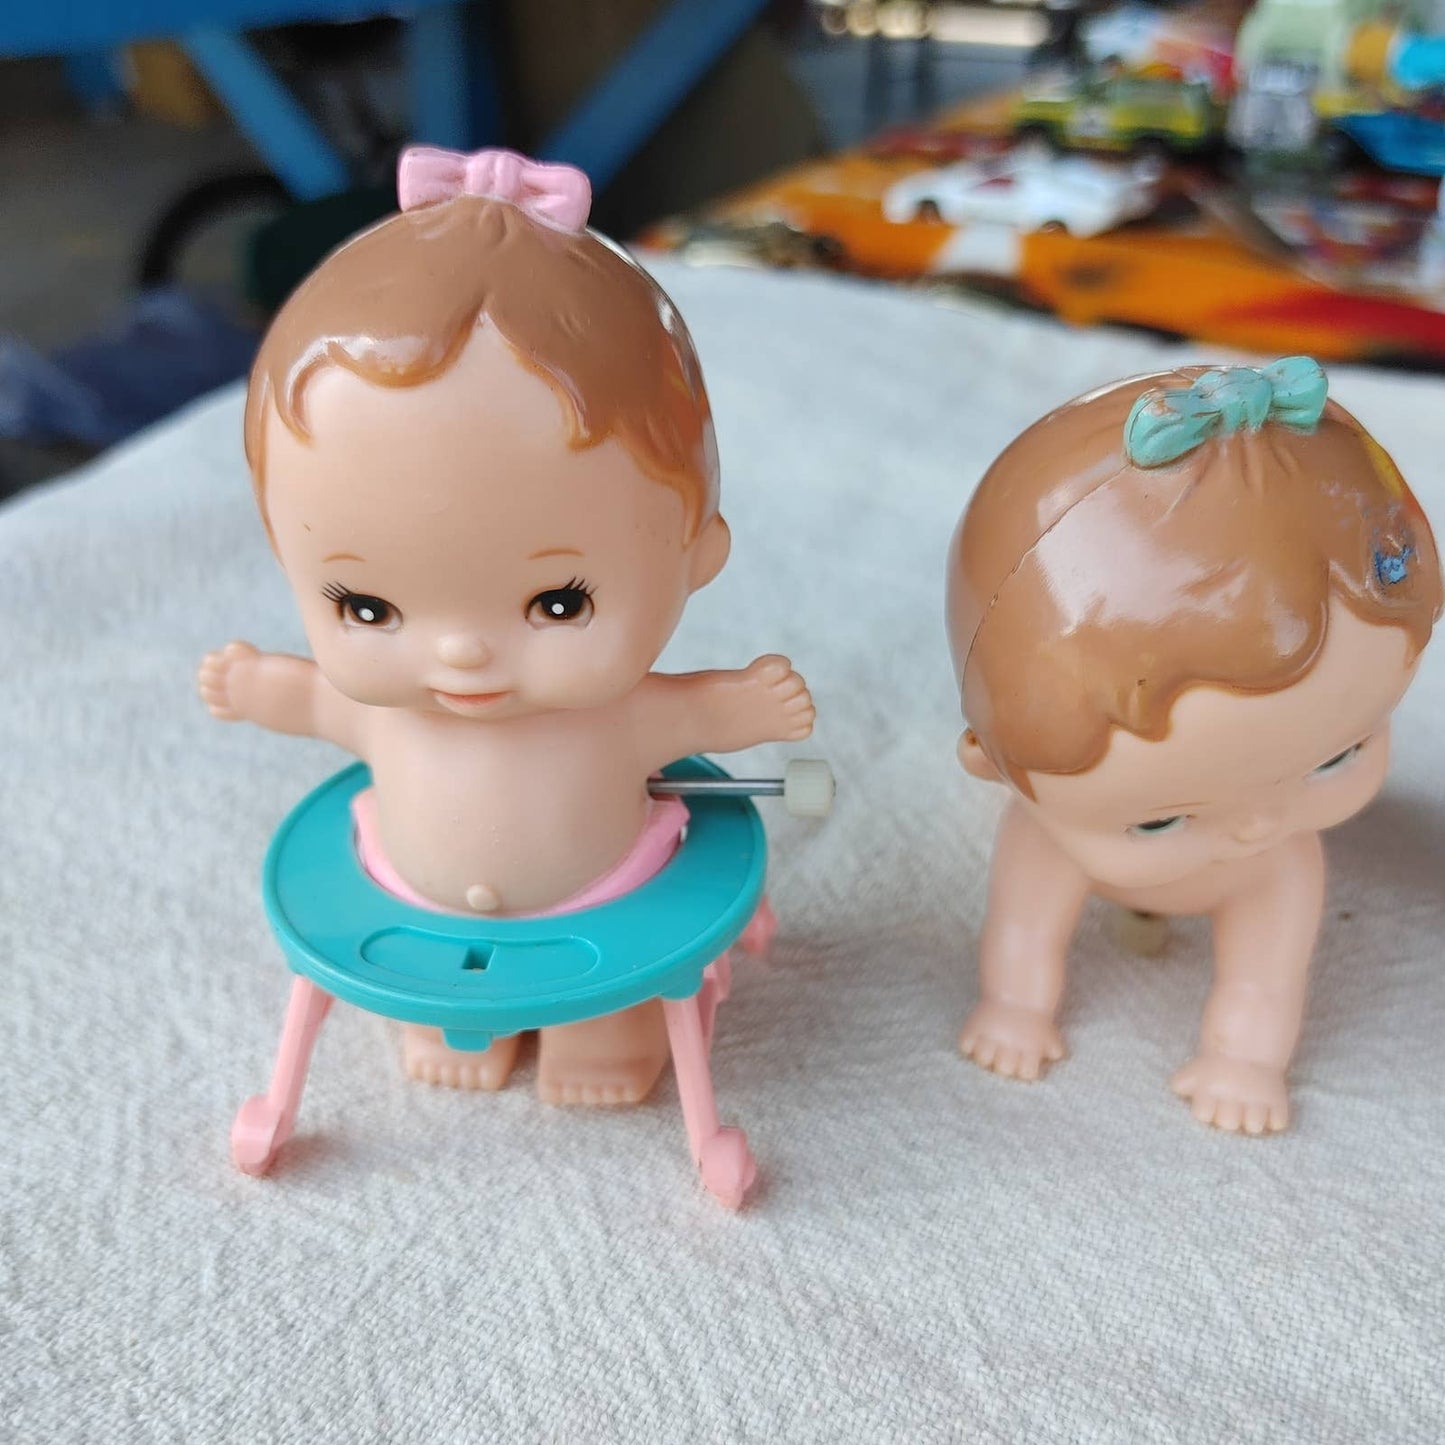 Baby Bundle! 3 Tomy wind-up toys babies 1980's retro collectible